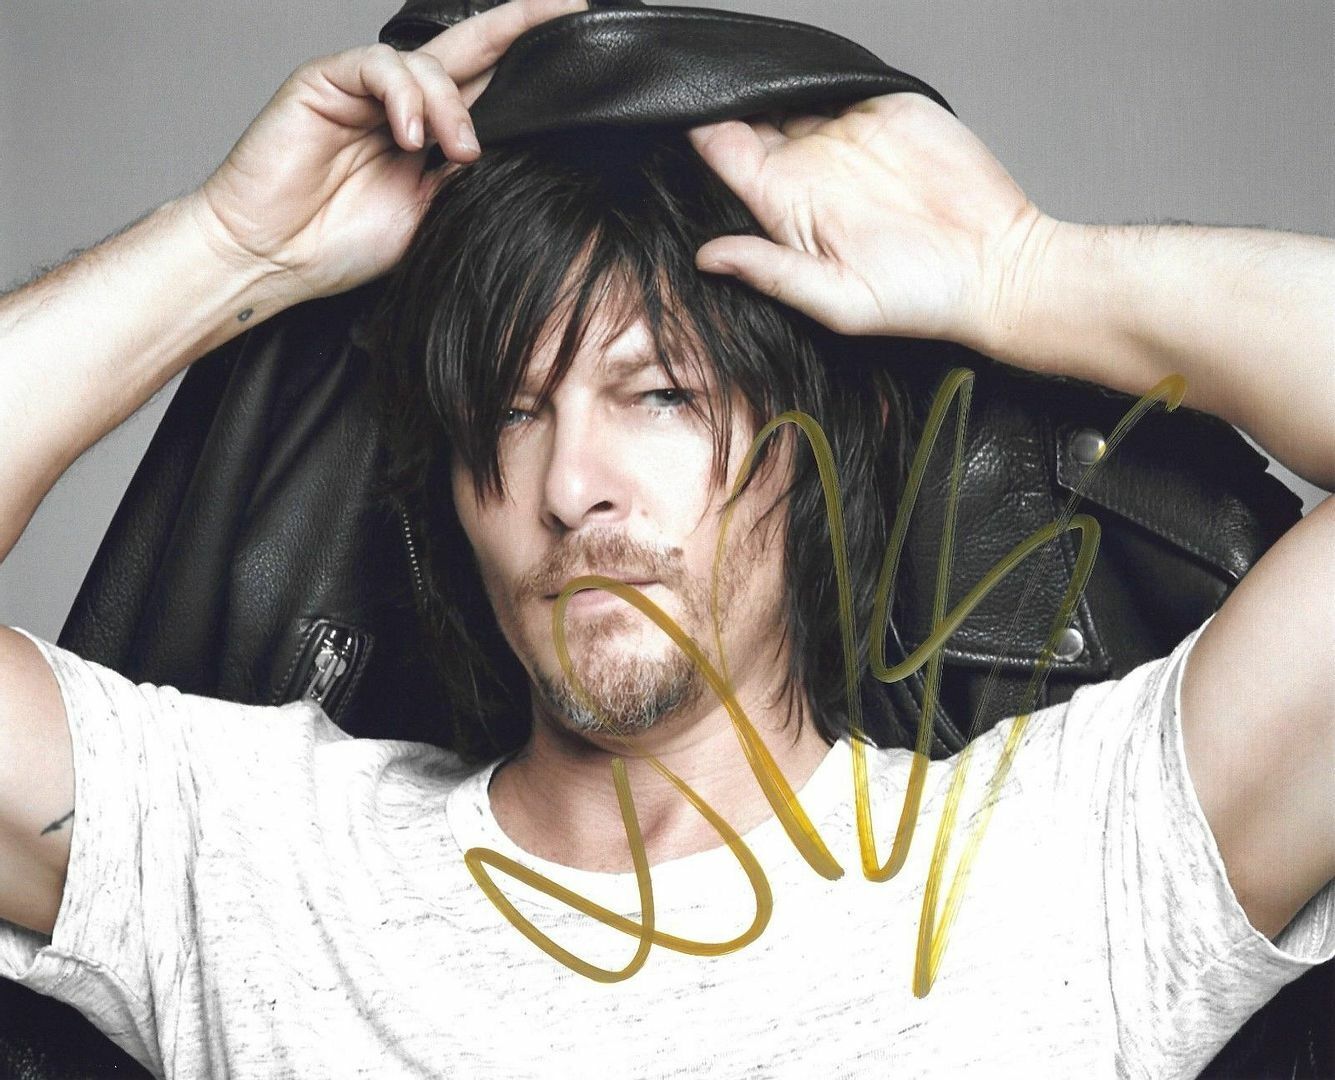 Norman Reedus Autograph Signed Photo Poster painting Print